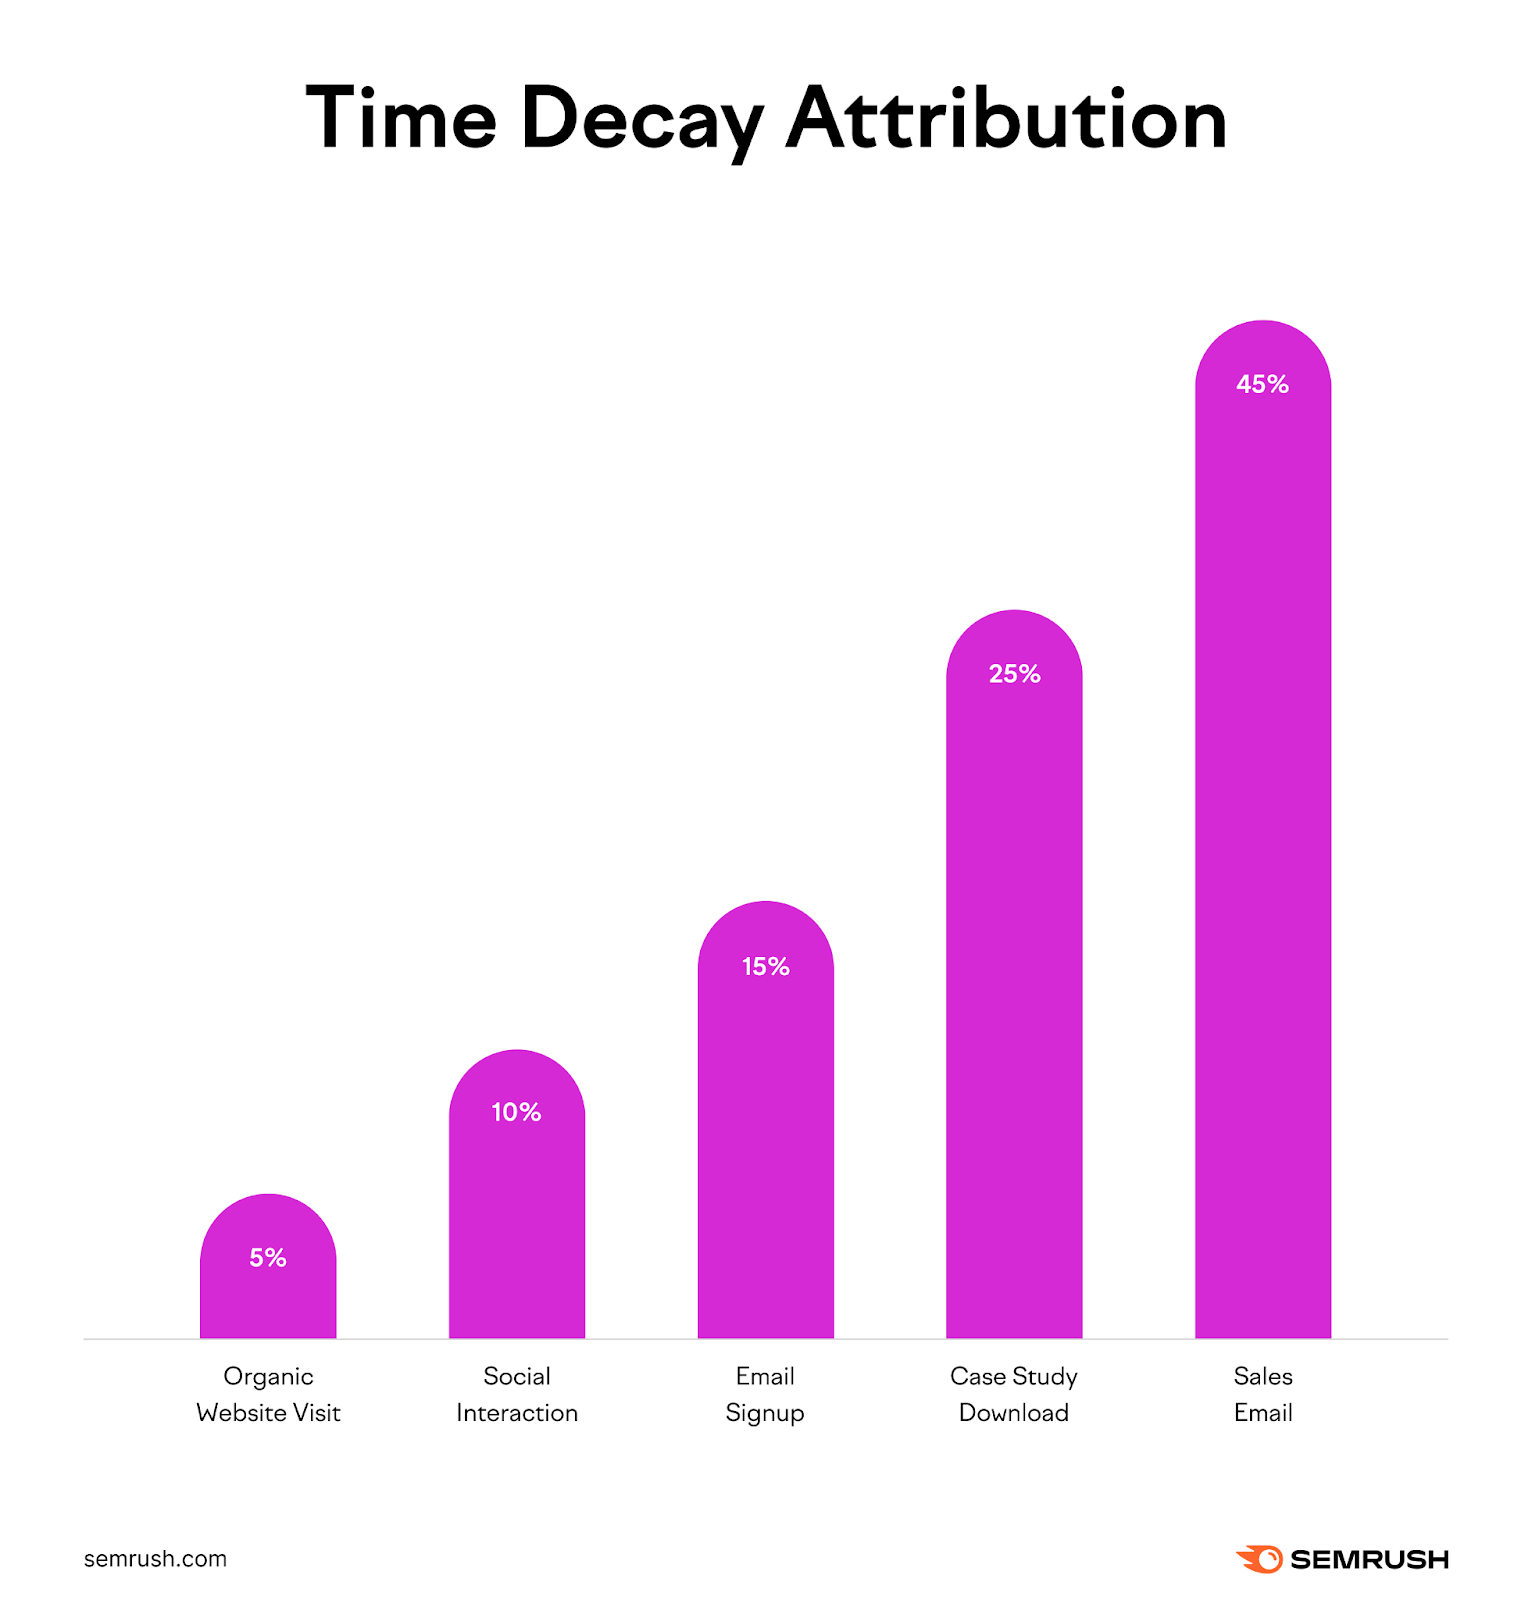 Time decay attribution assigns an increasing amount of credit to touchpoints from first to last.